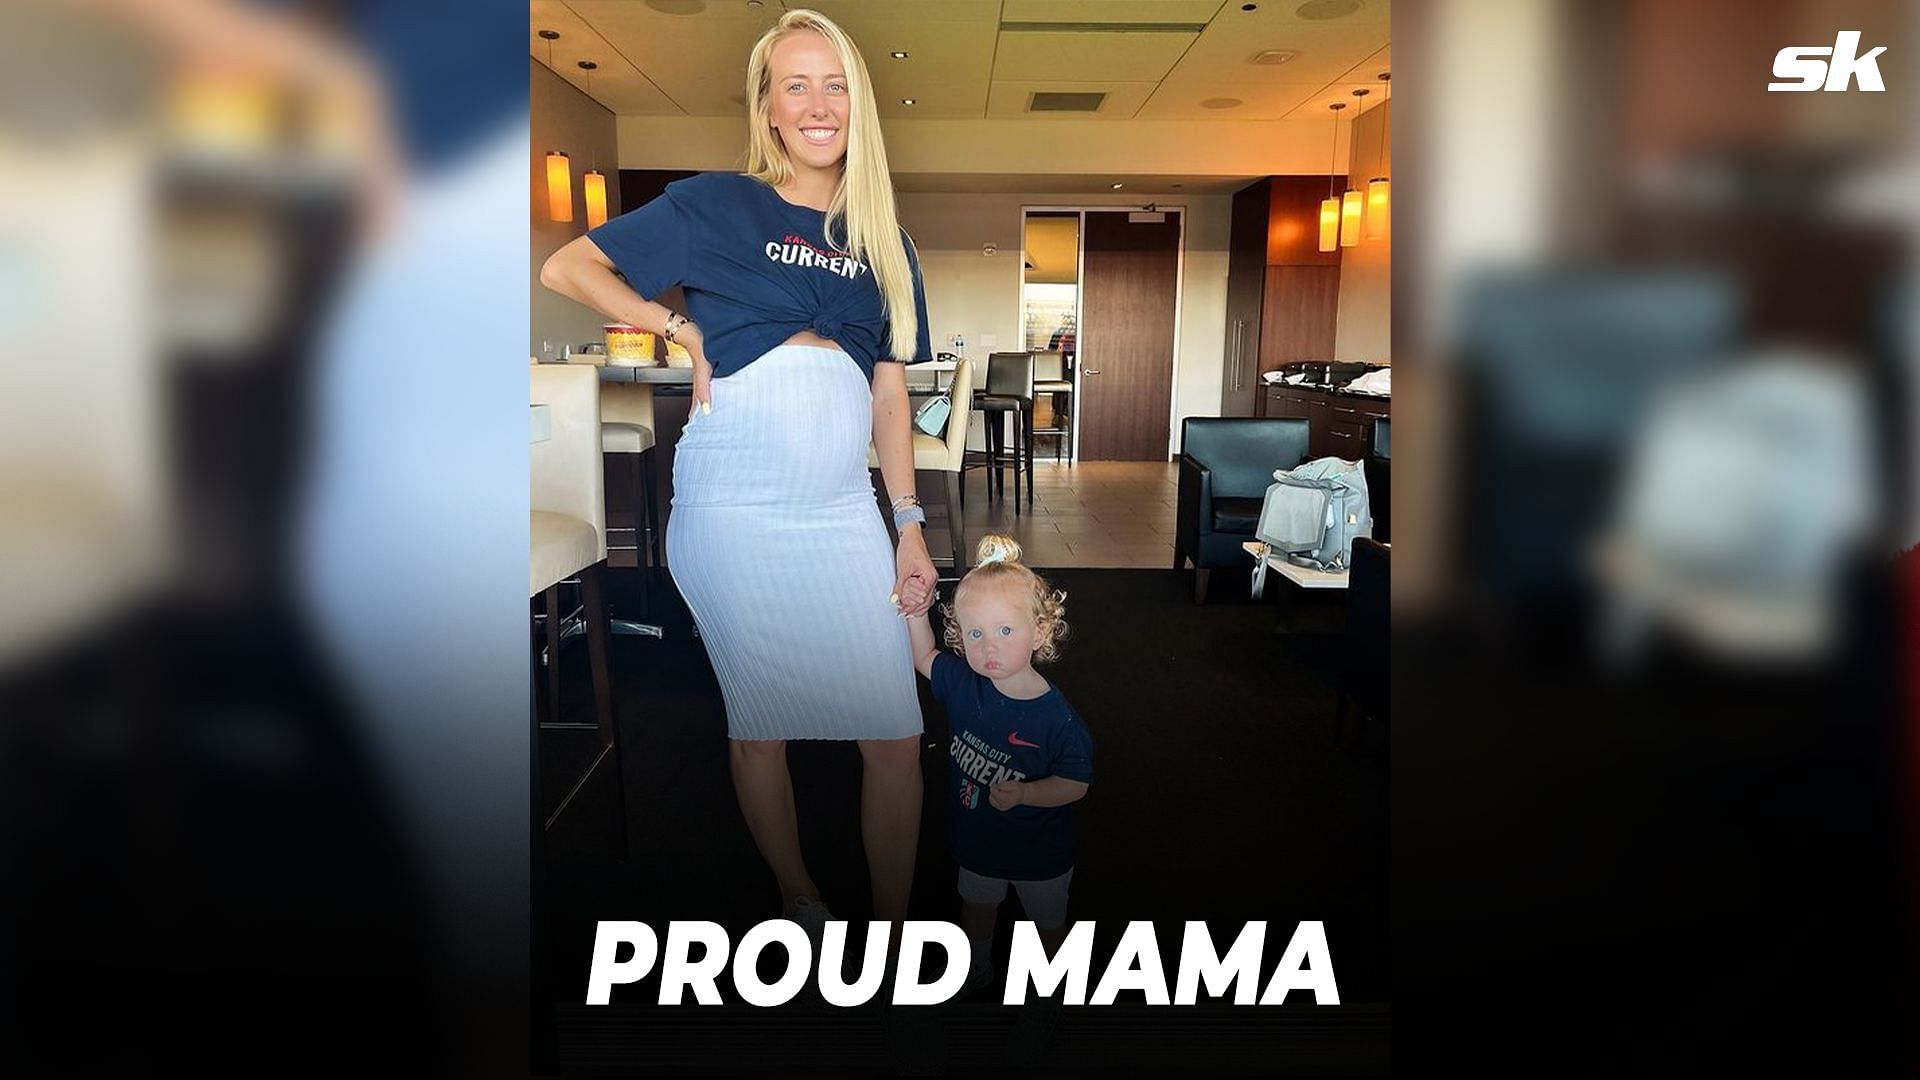  Brittany Mahomes shows off baby bump in adorable picture with daughter Sterling Skye